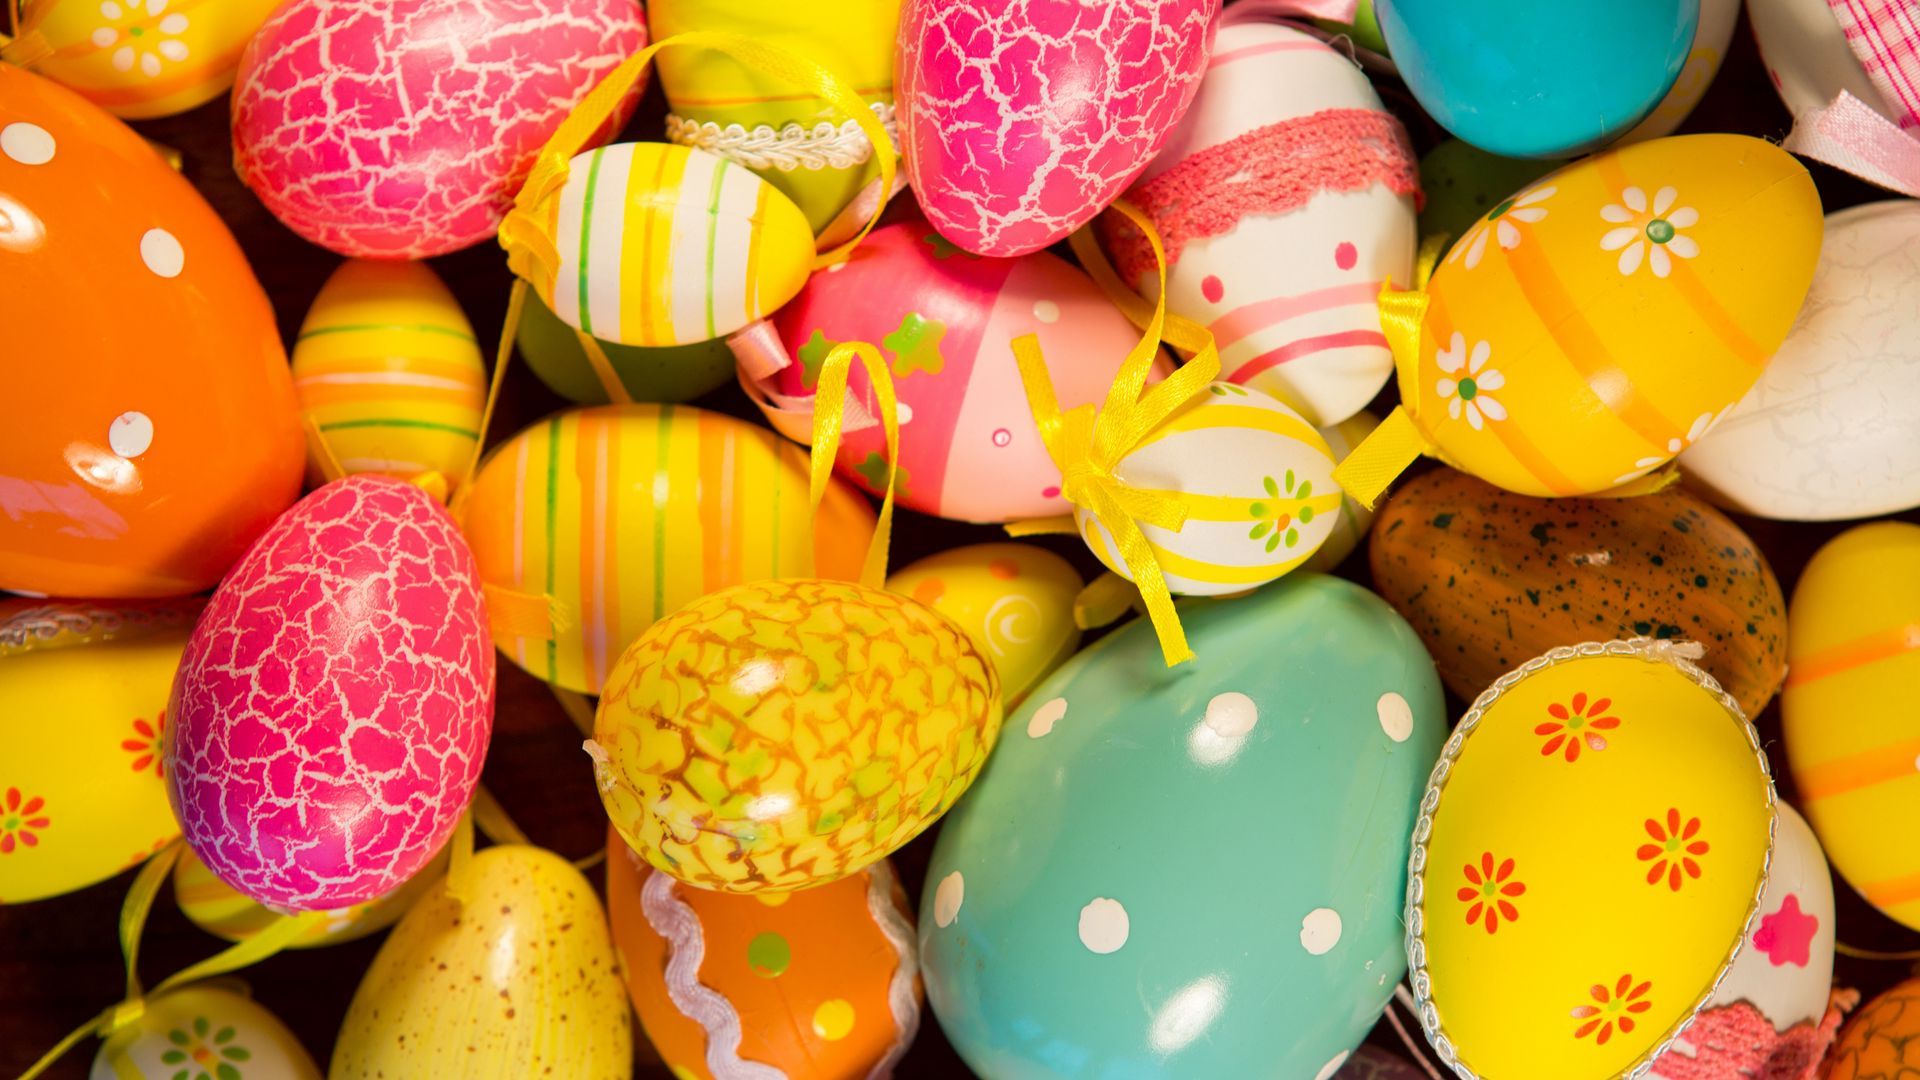 Download wallpaper 1920x1080 easter eggs, easter, painted eggs, holiday full hd, hdtv, fhd, 1080p HD background